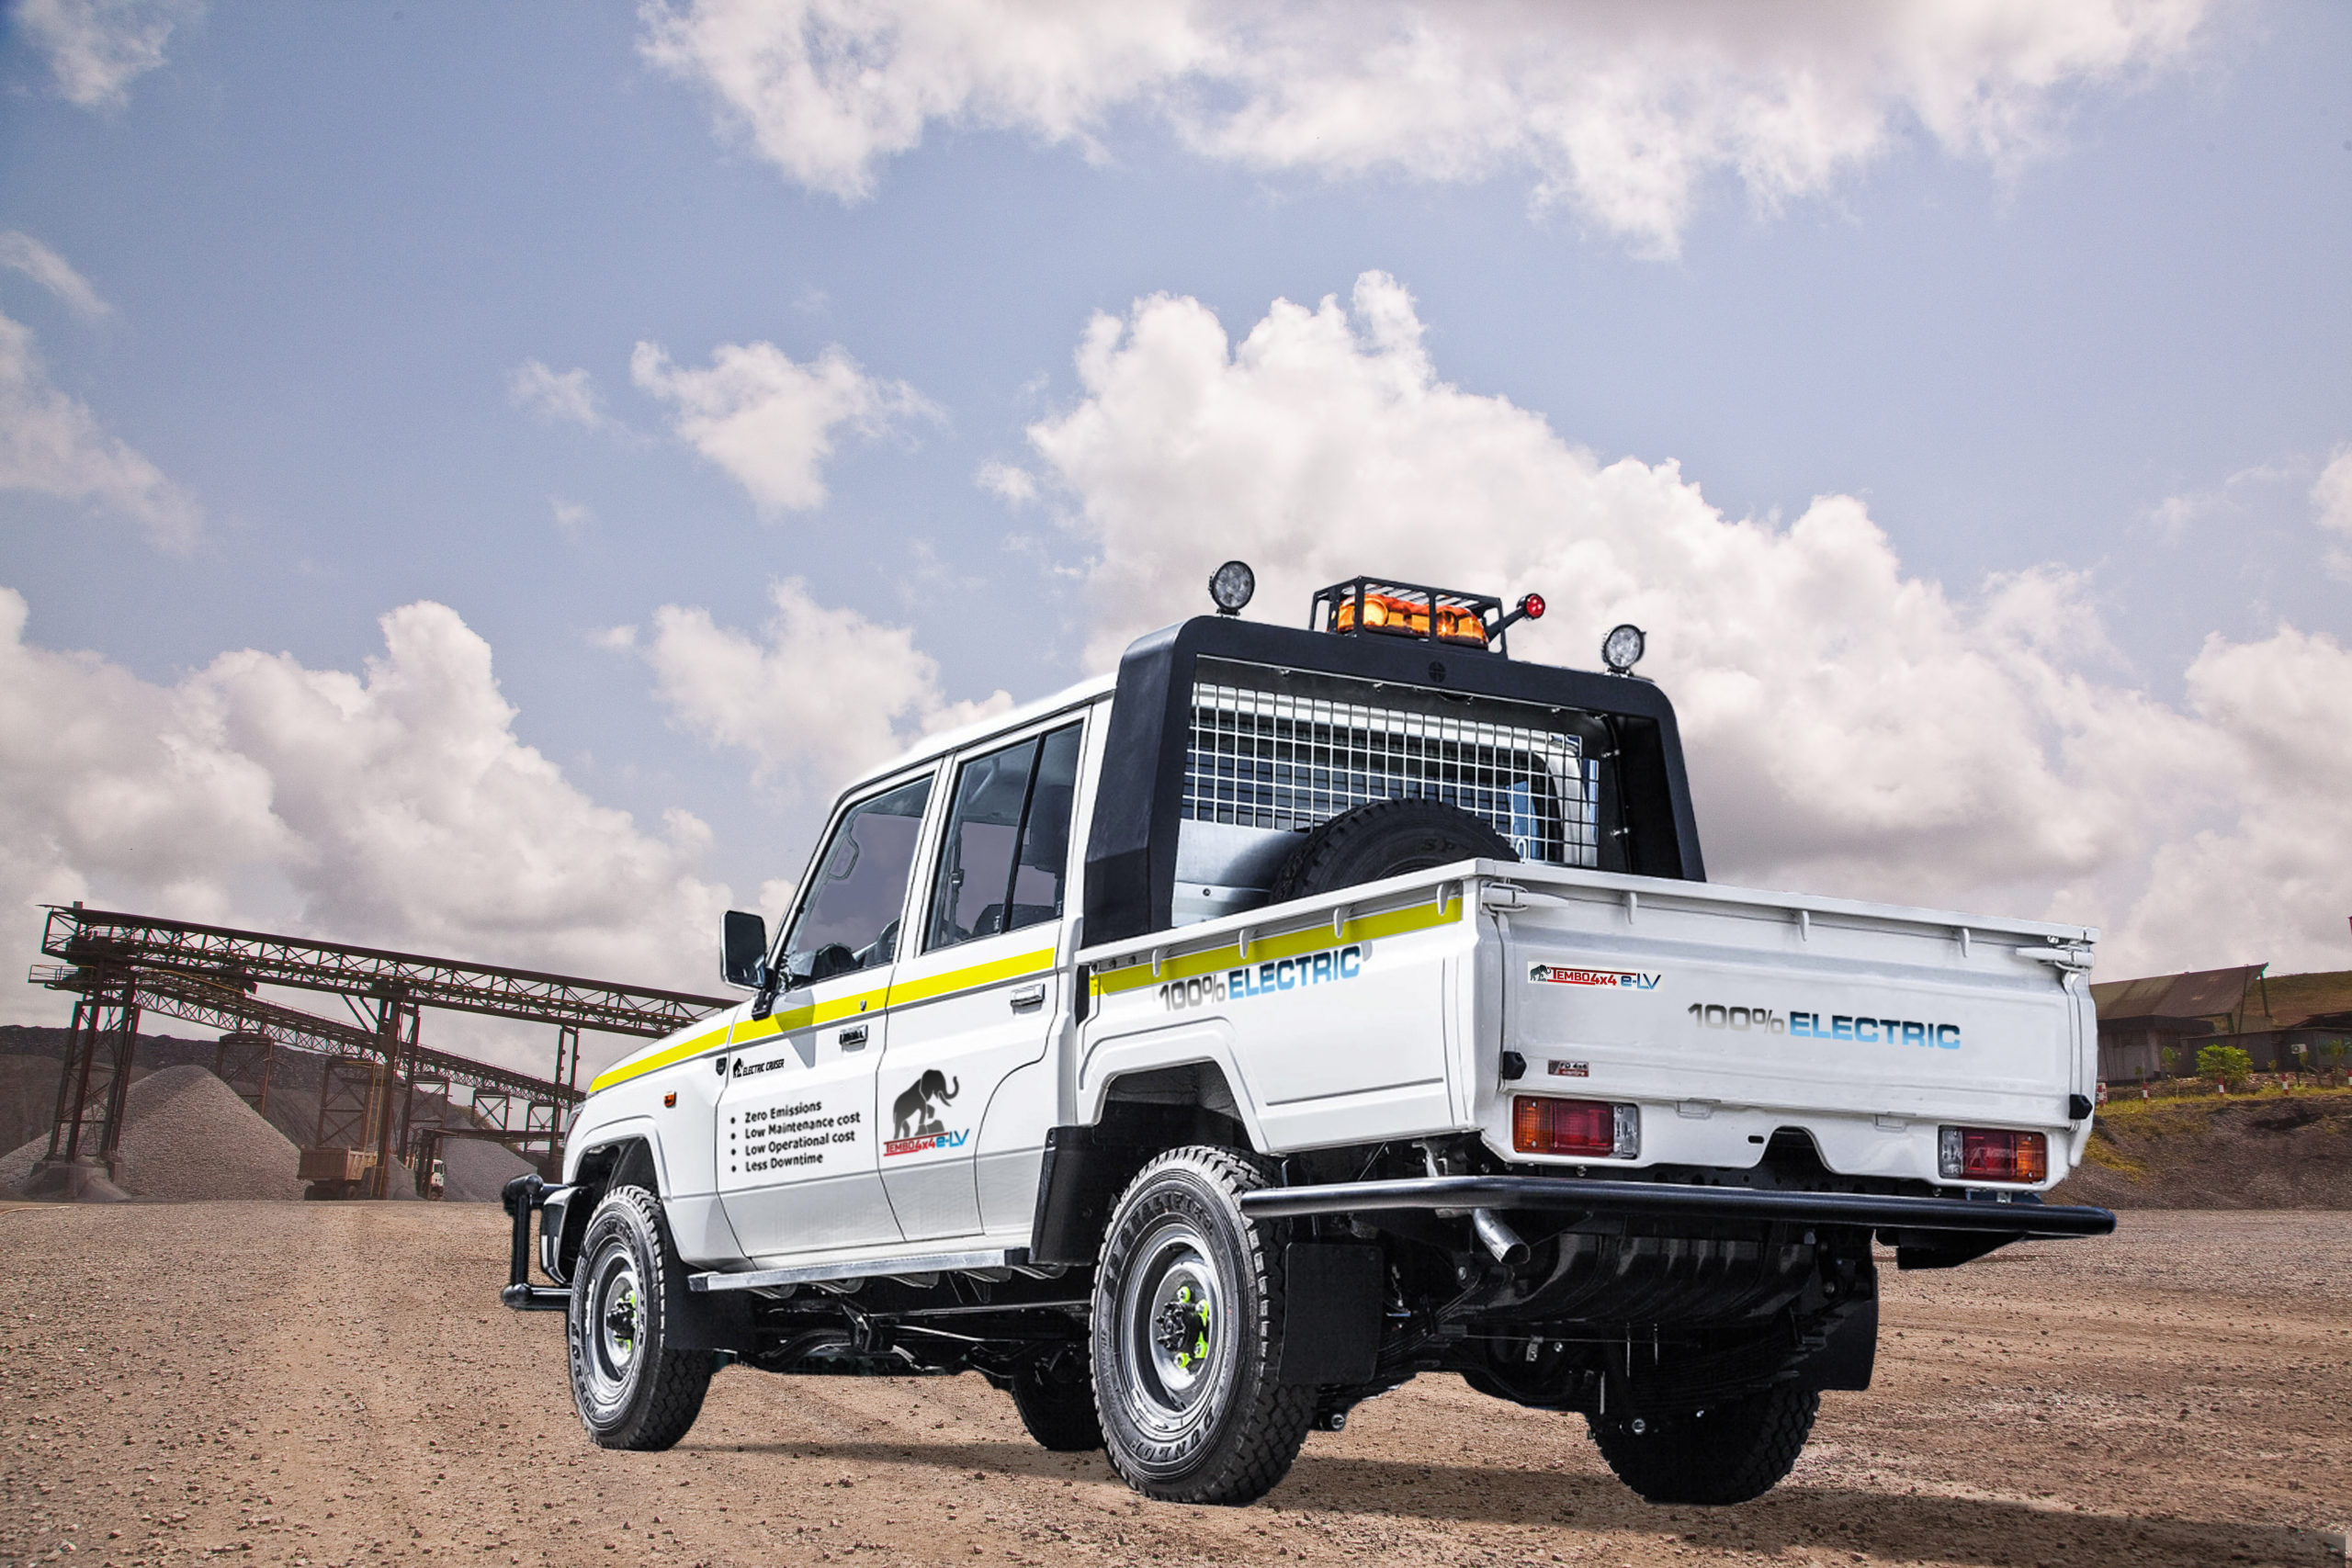 VivoPower to expand battery-electric vehicle reach with Tembo 4x4 e-LV investment ...